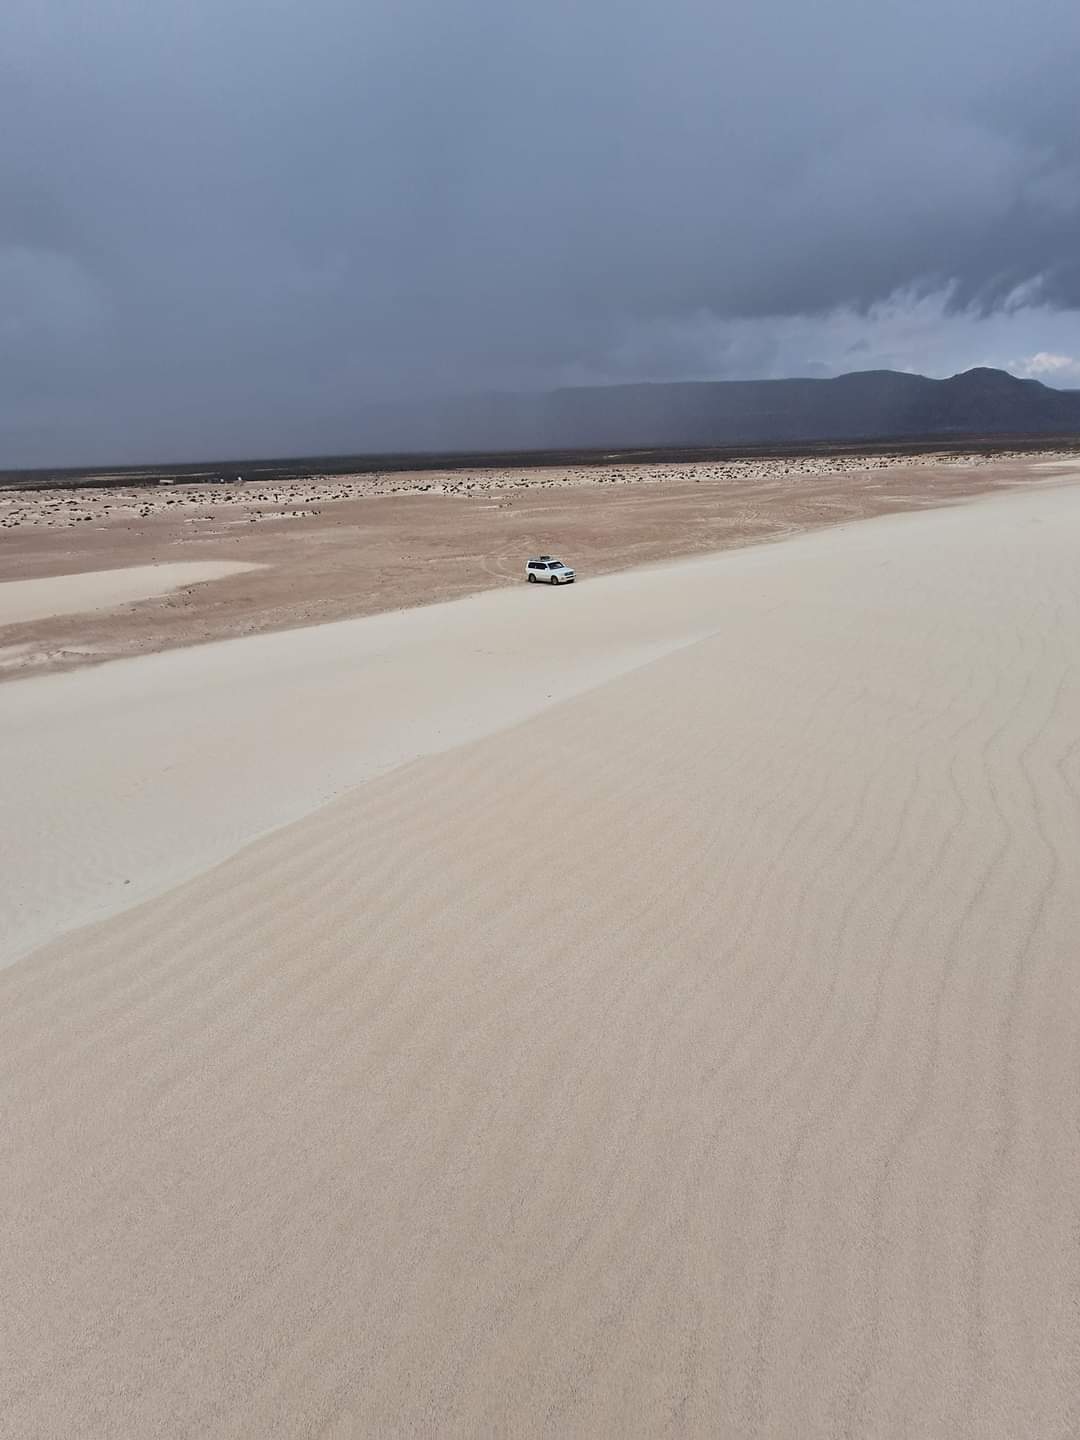 Our car dwarfed by Zehj sand dune